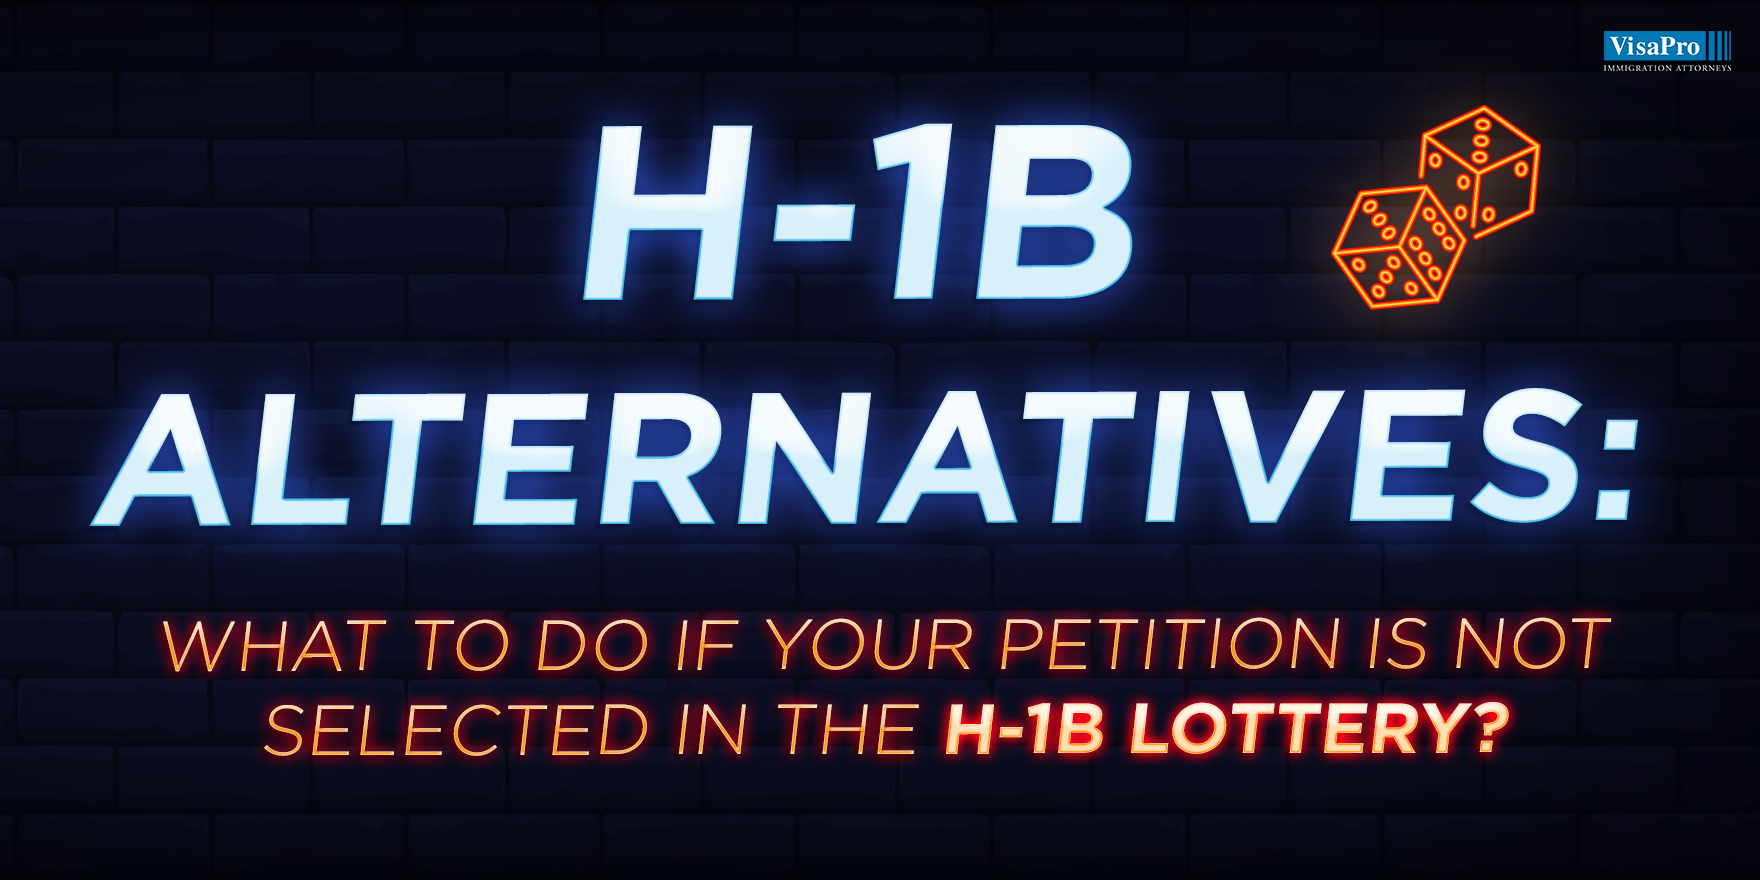 H-1B Alternatives: What To Do If Your Petition Is Not Selected In The H-1B Lottery?, San Diego, California, United States